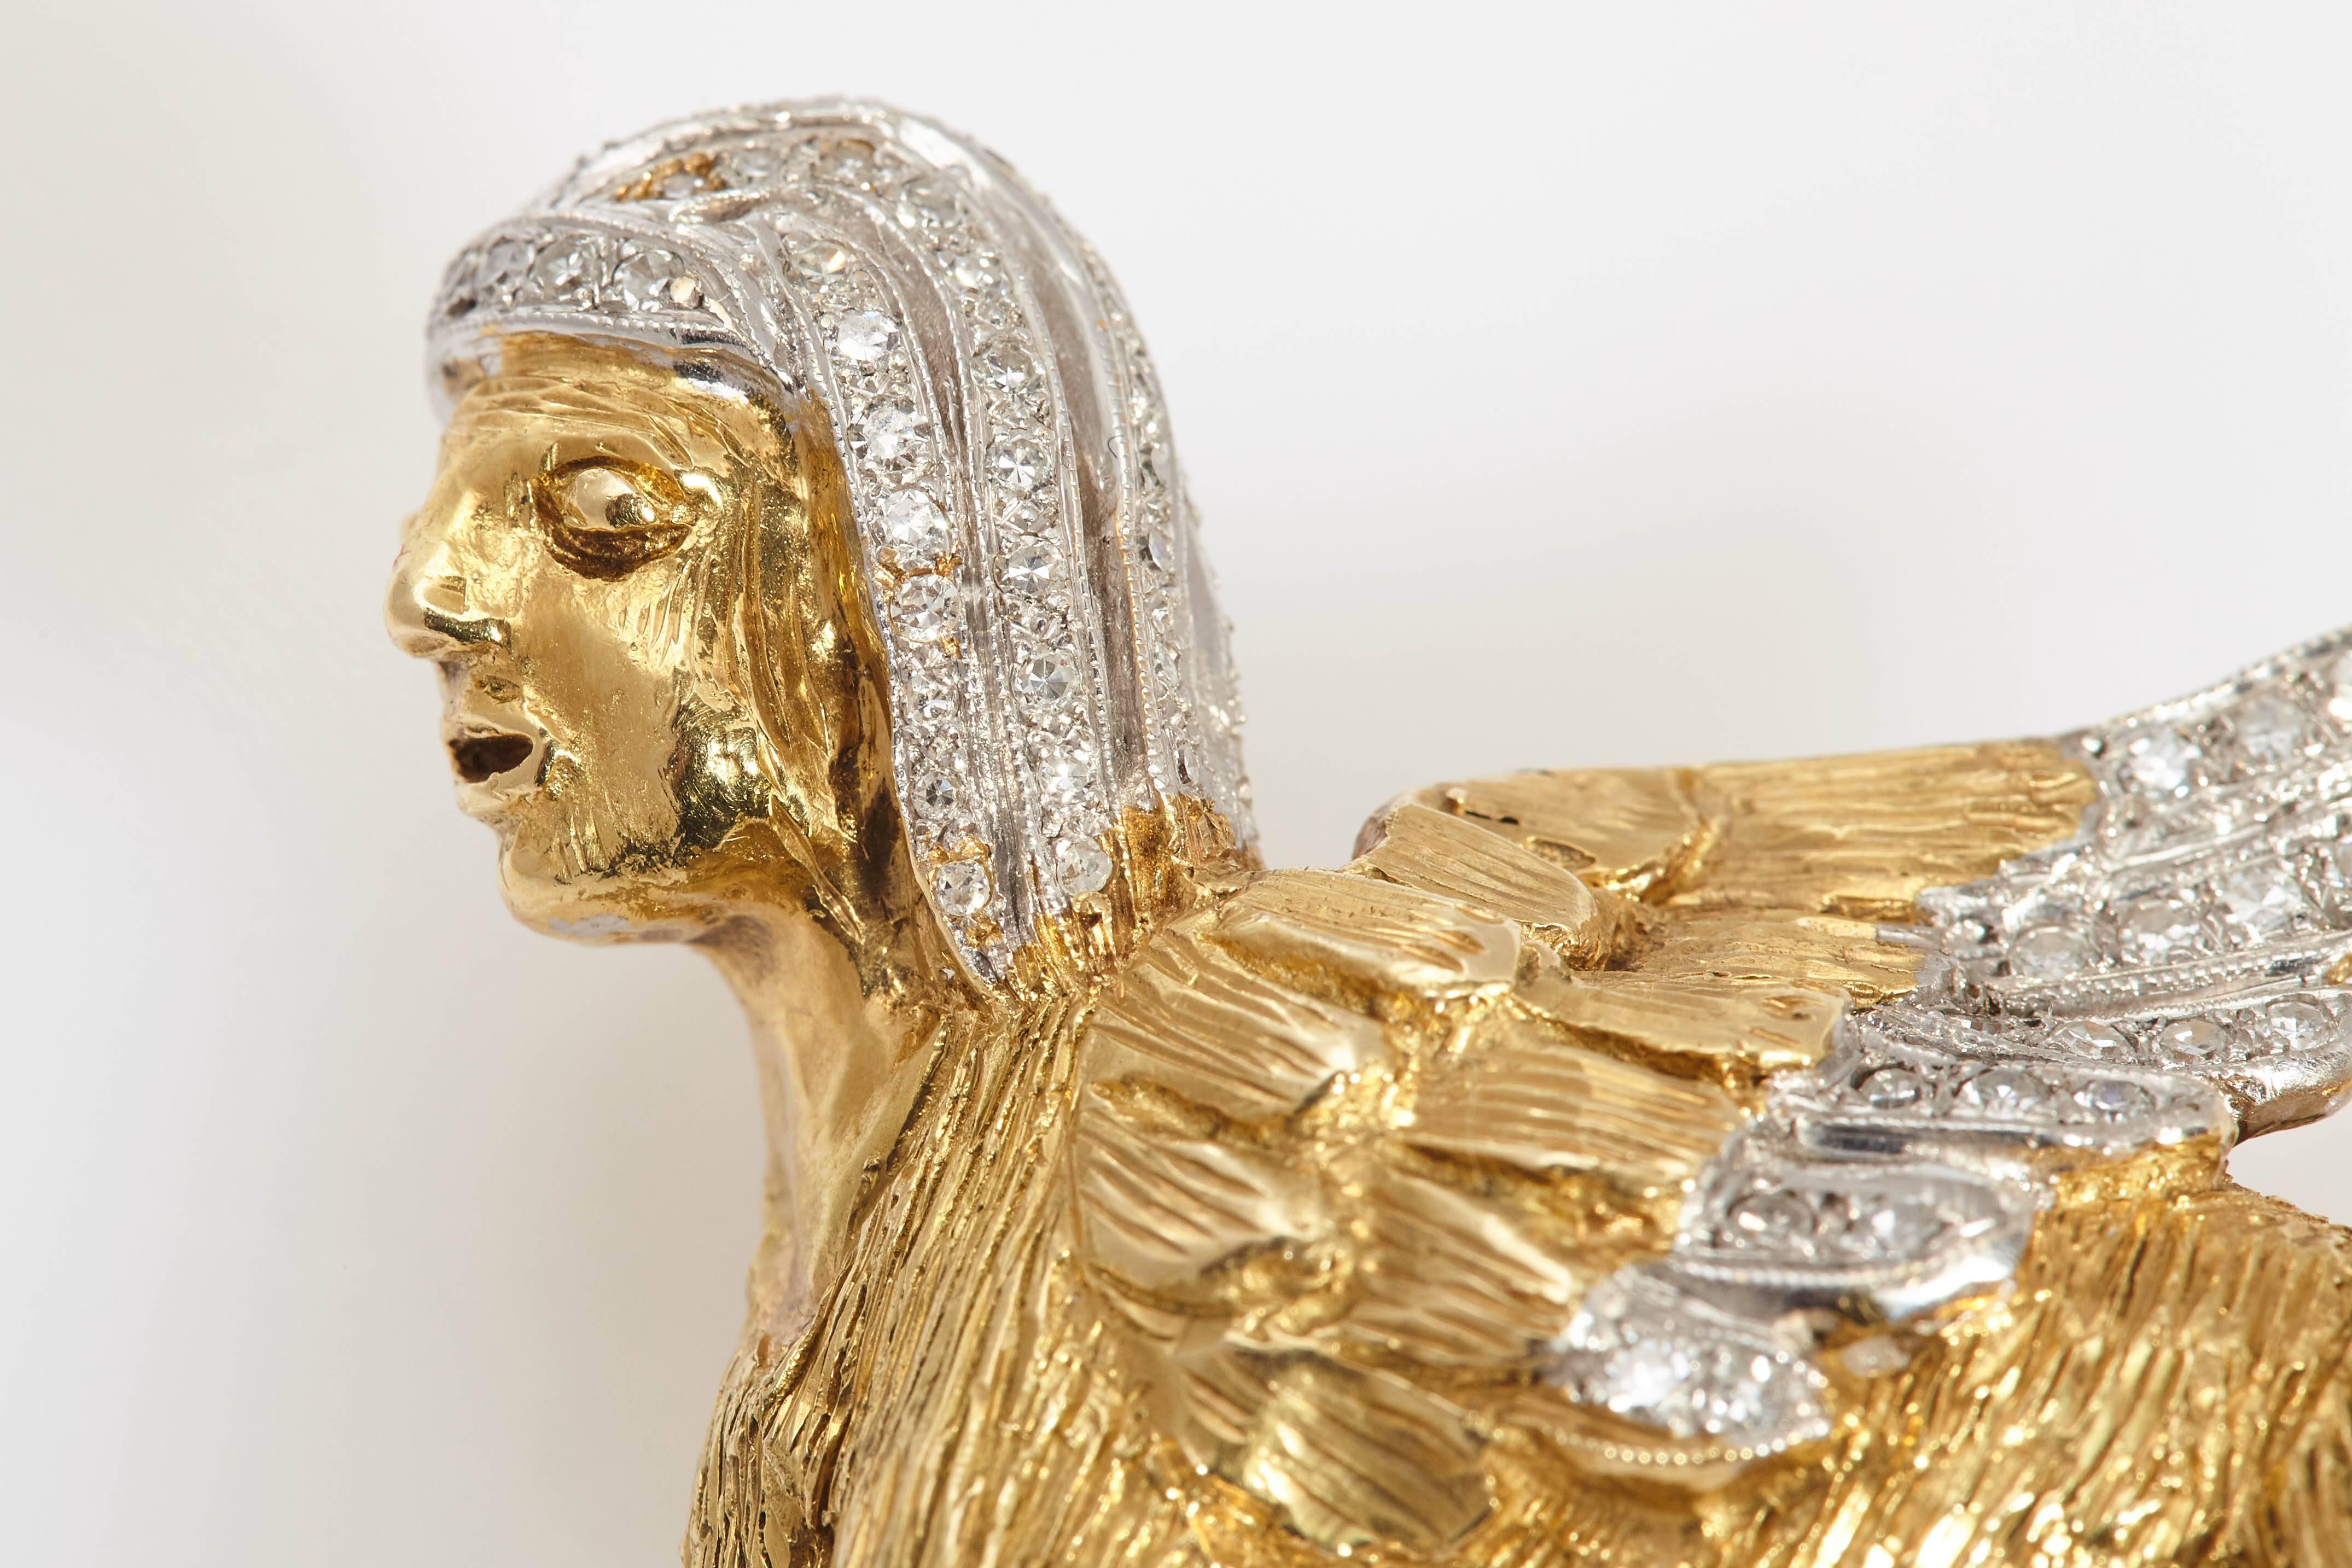 A peculiar 18kt yellow gold and diamond Sphinx brooch. Made in Italy, circa 1970 